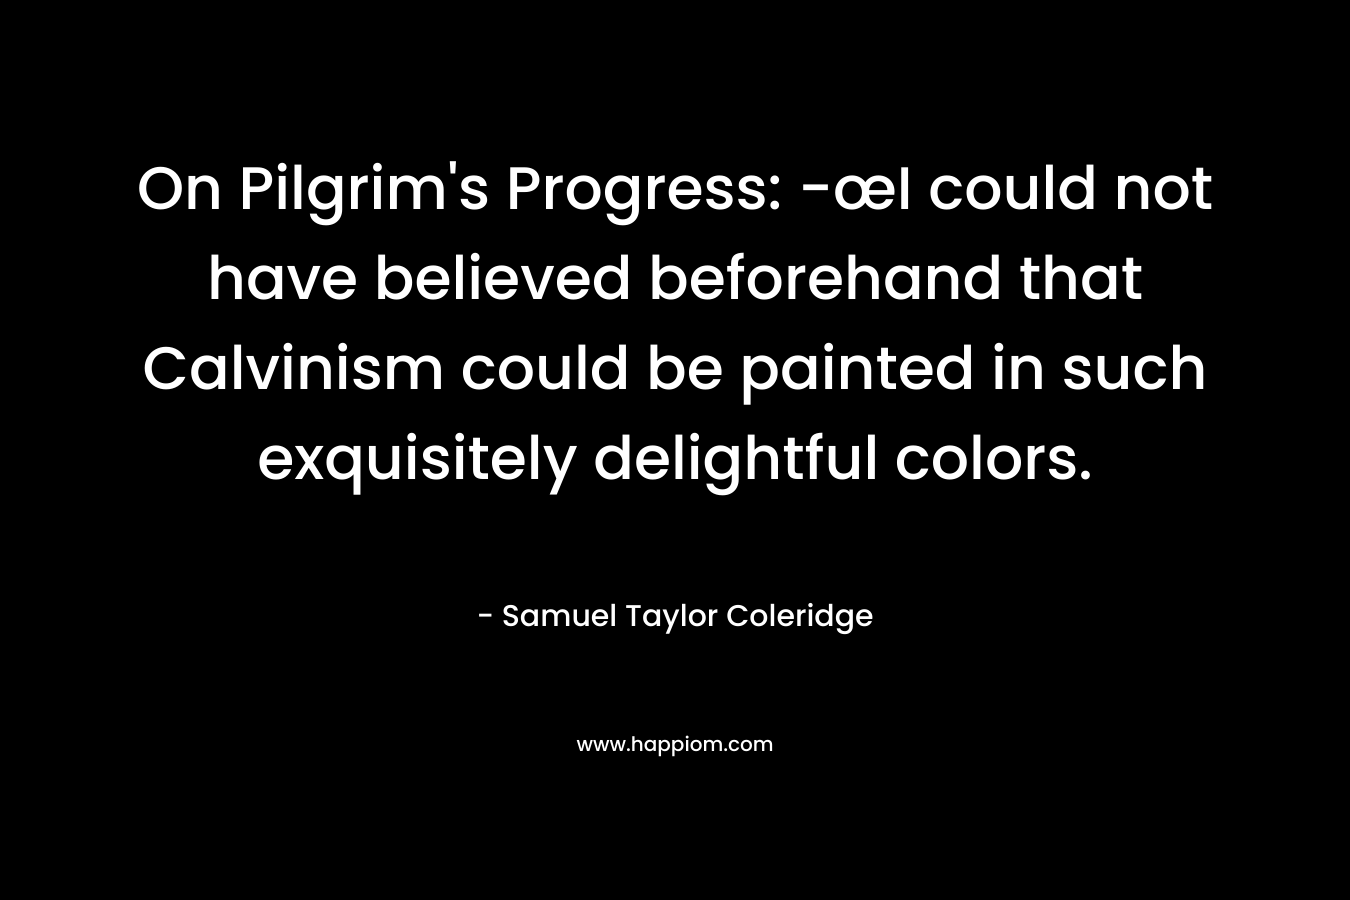 On Pilgrim's Progress: -œI could not have believed beforehand that Calvinism could be painted in such exquisitely delightful colors.